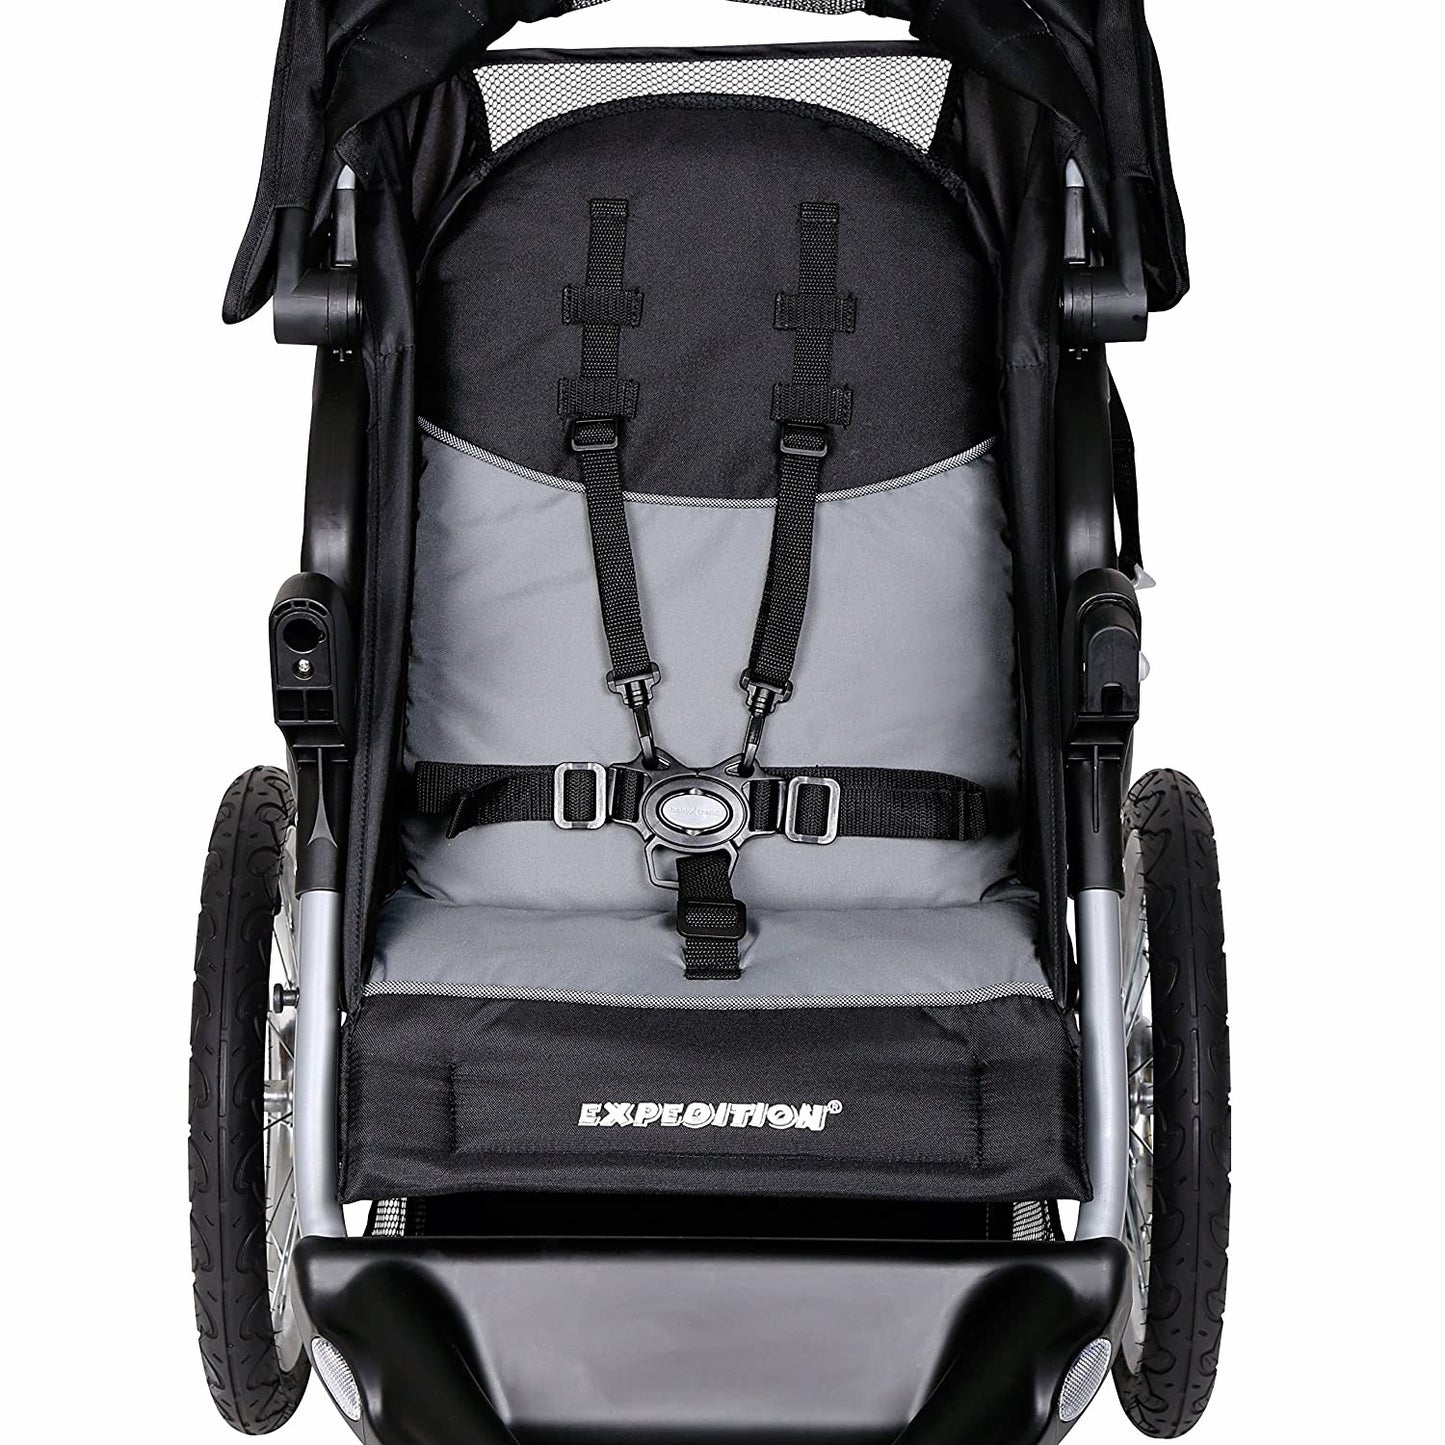 Baby Trend Expedition Travel System in Millennium White